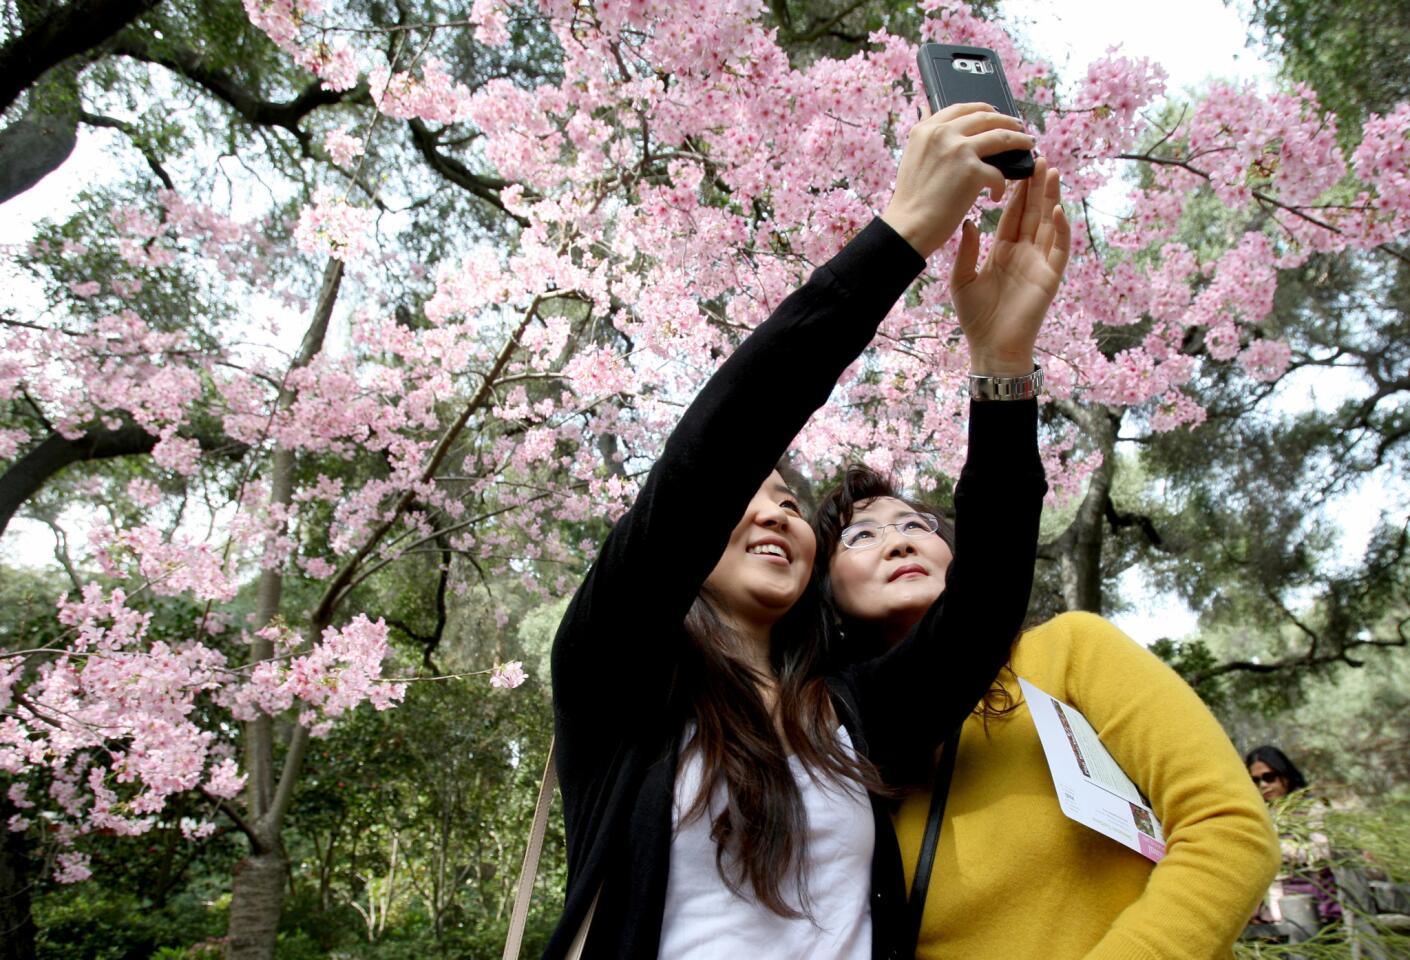 Christine Chung, 24 of Los Angeles, left, and her mother Celes Chung, take a selfie with cherry tree blossoms during the annual Cherry Blossom Festival at Descanso Gardens in La Cañada Flintridge on Saturday, March 4, 2017. The festival is held during two weekends this year.